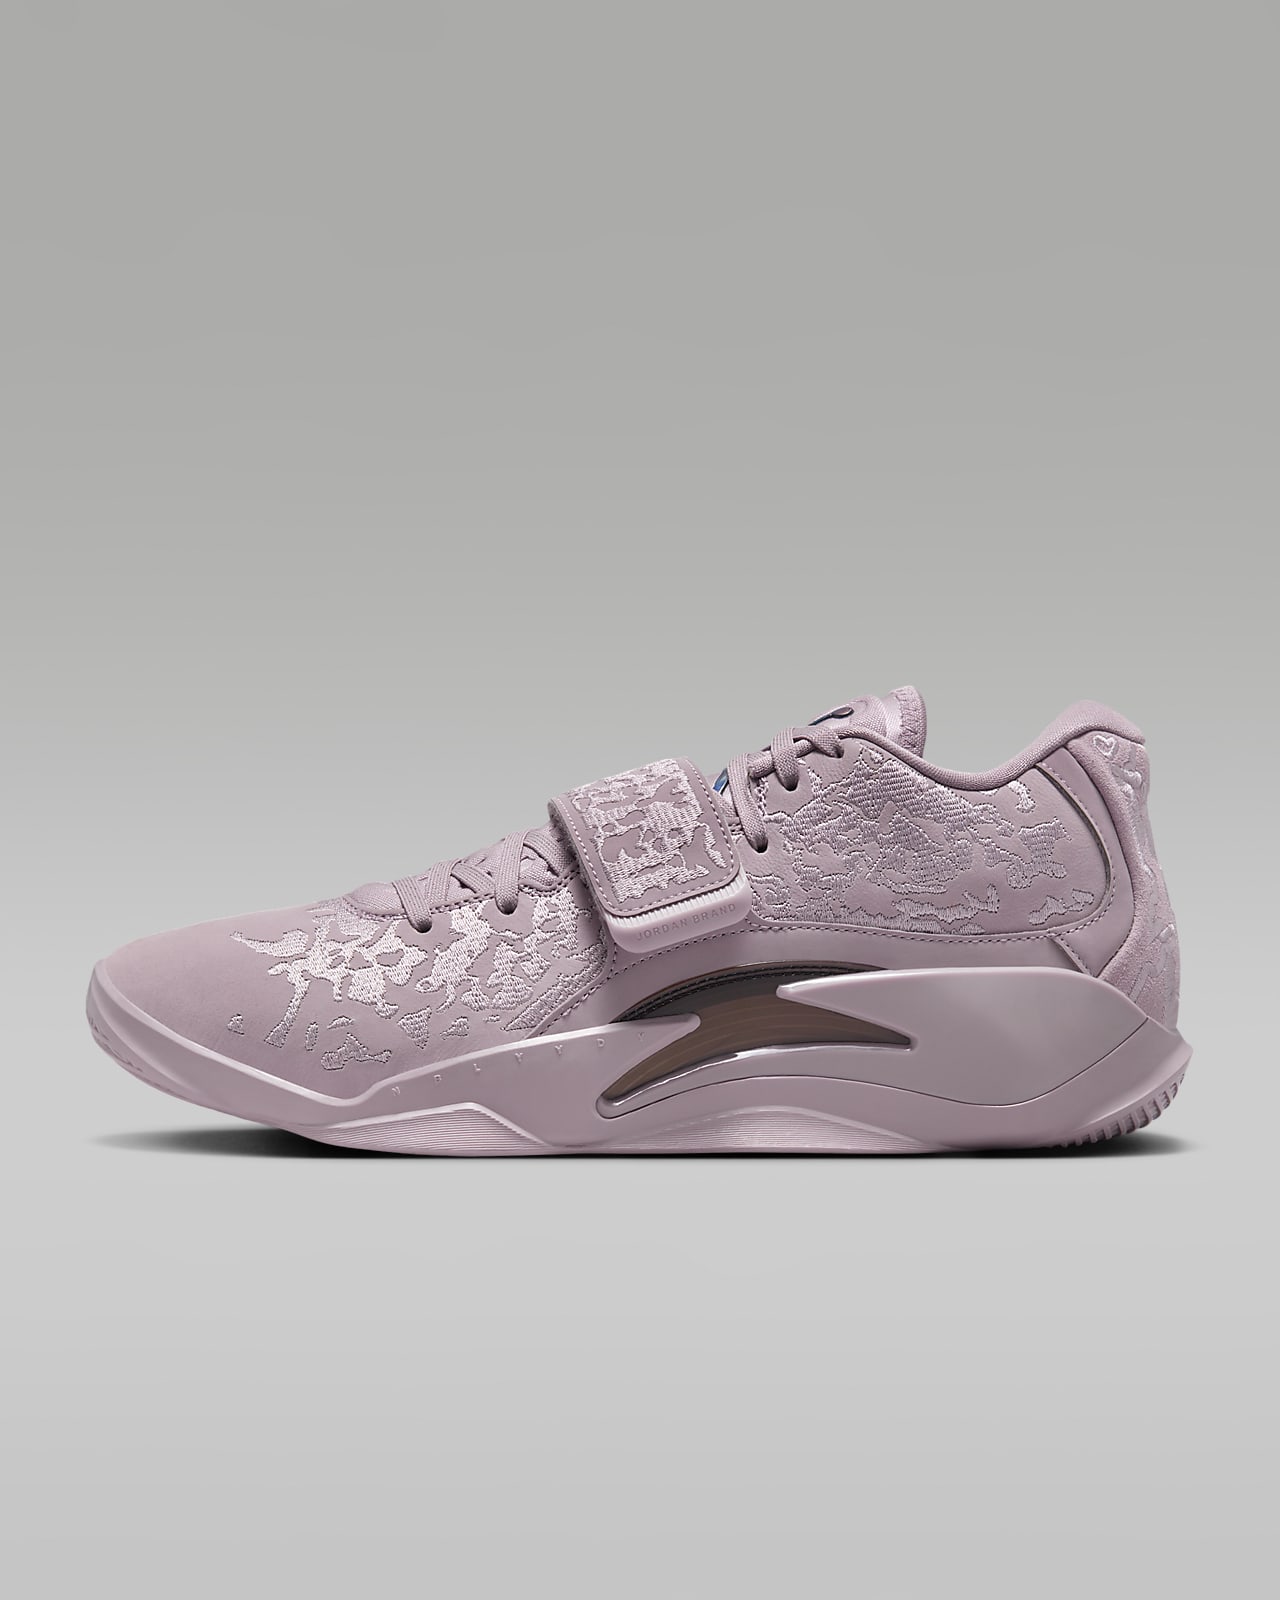 Zion 3 'Orchid' SE PF Basketball Shoes